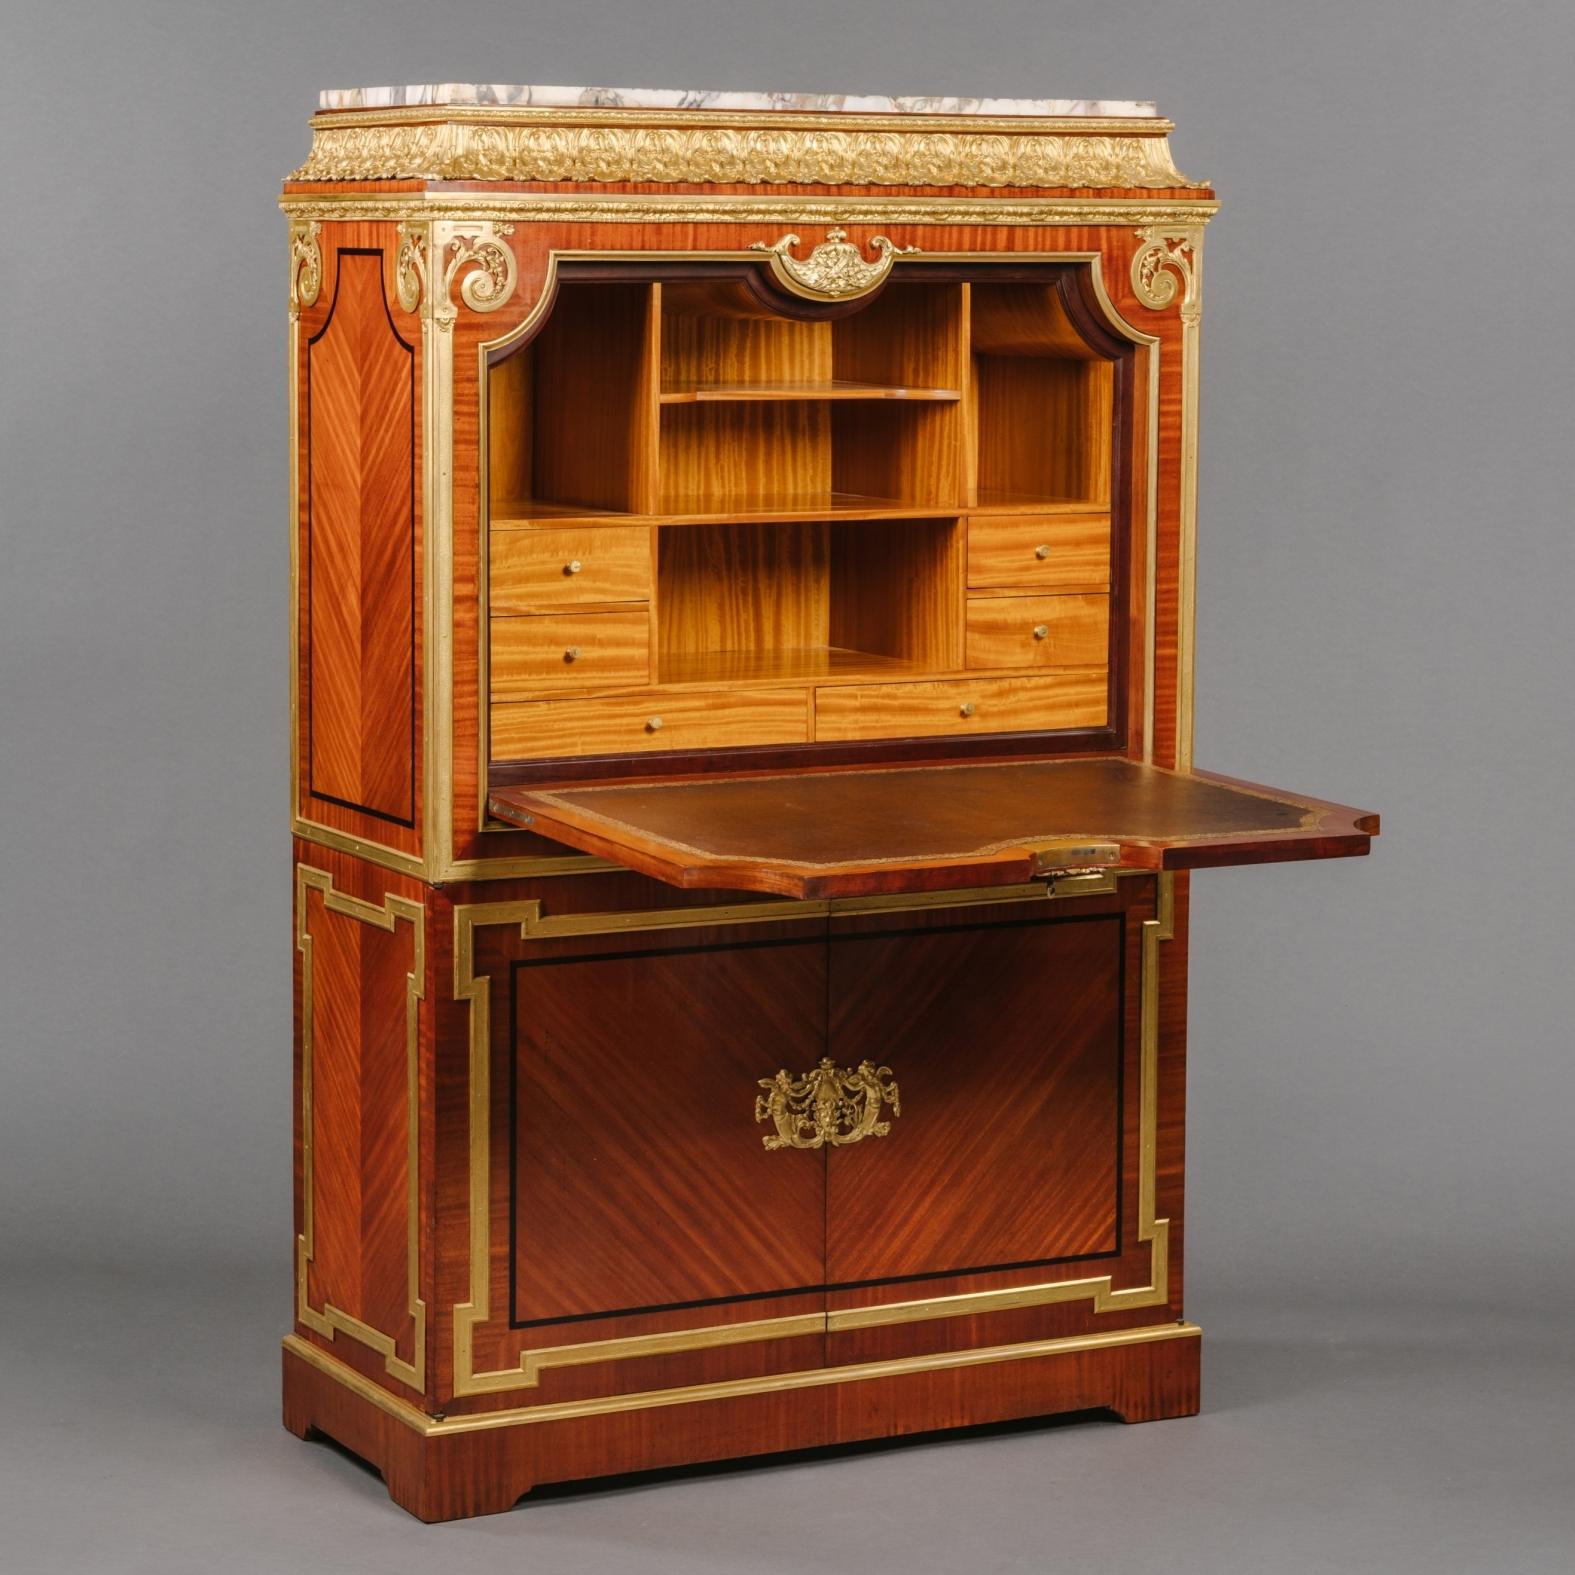 An Impressive Louis XVI style gilt-bronze mounted secrétaire à Abattant, In The Manner Of André Charles Boulle.

This drop-front writing cabinet or secrétaire à abattant is finished in beautiful veneers with radiating figured panels. The inset